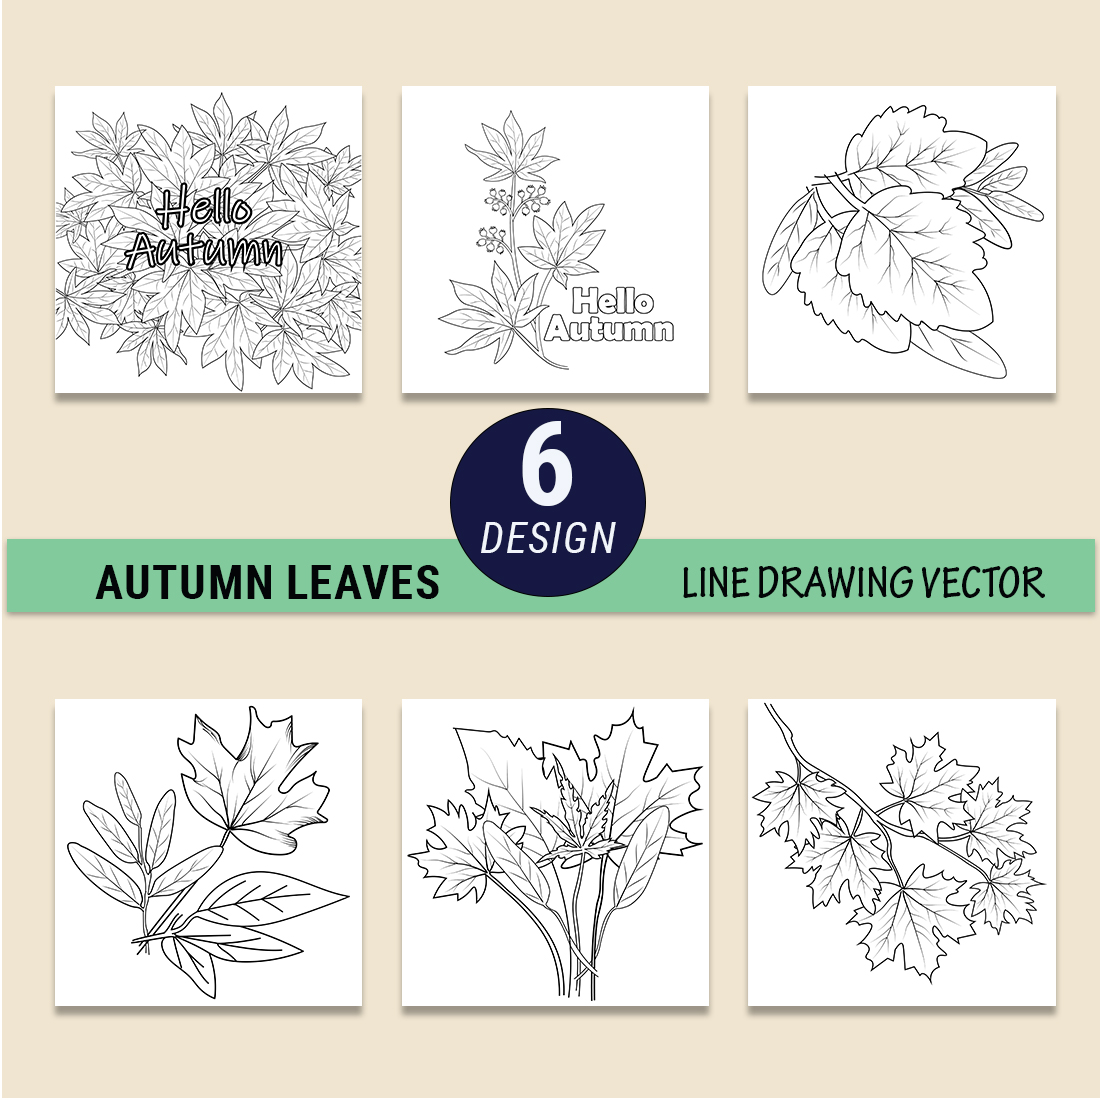 Freehand Drawing Of Single Birch Tree In Autumn Season Stock Illustration -  Download Image Now - iStock